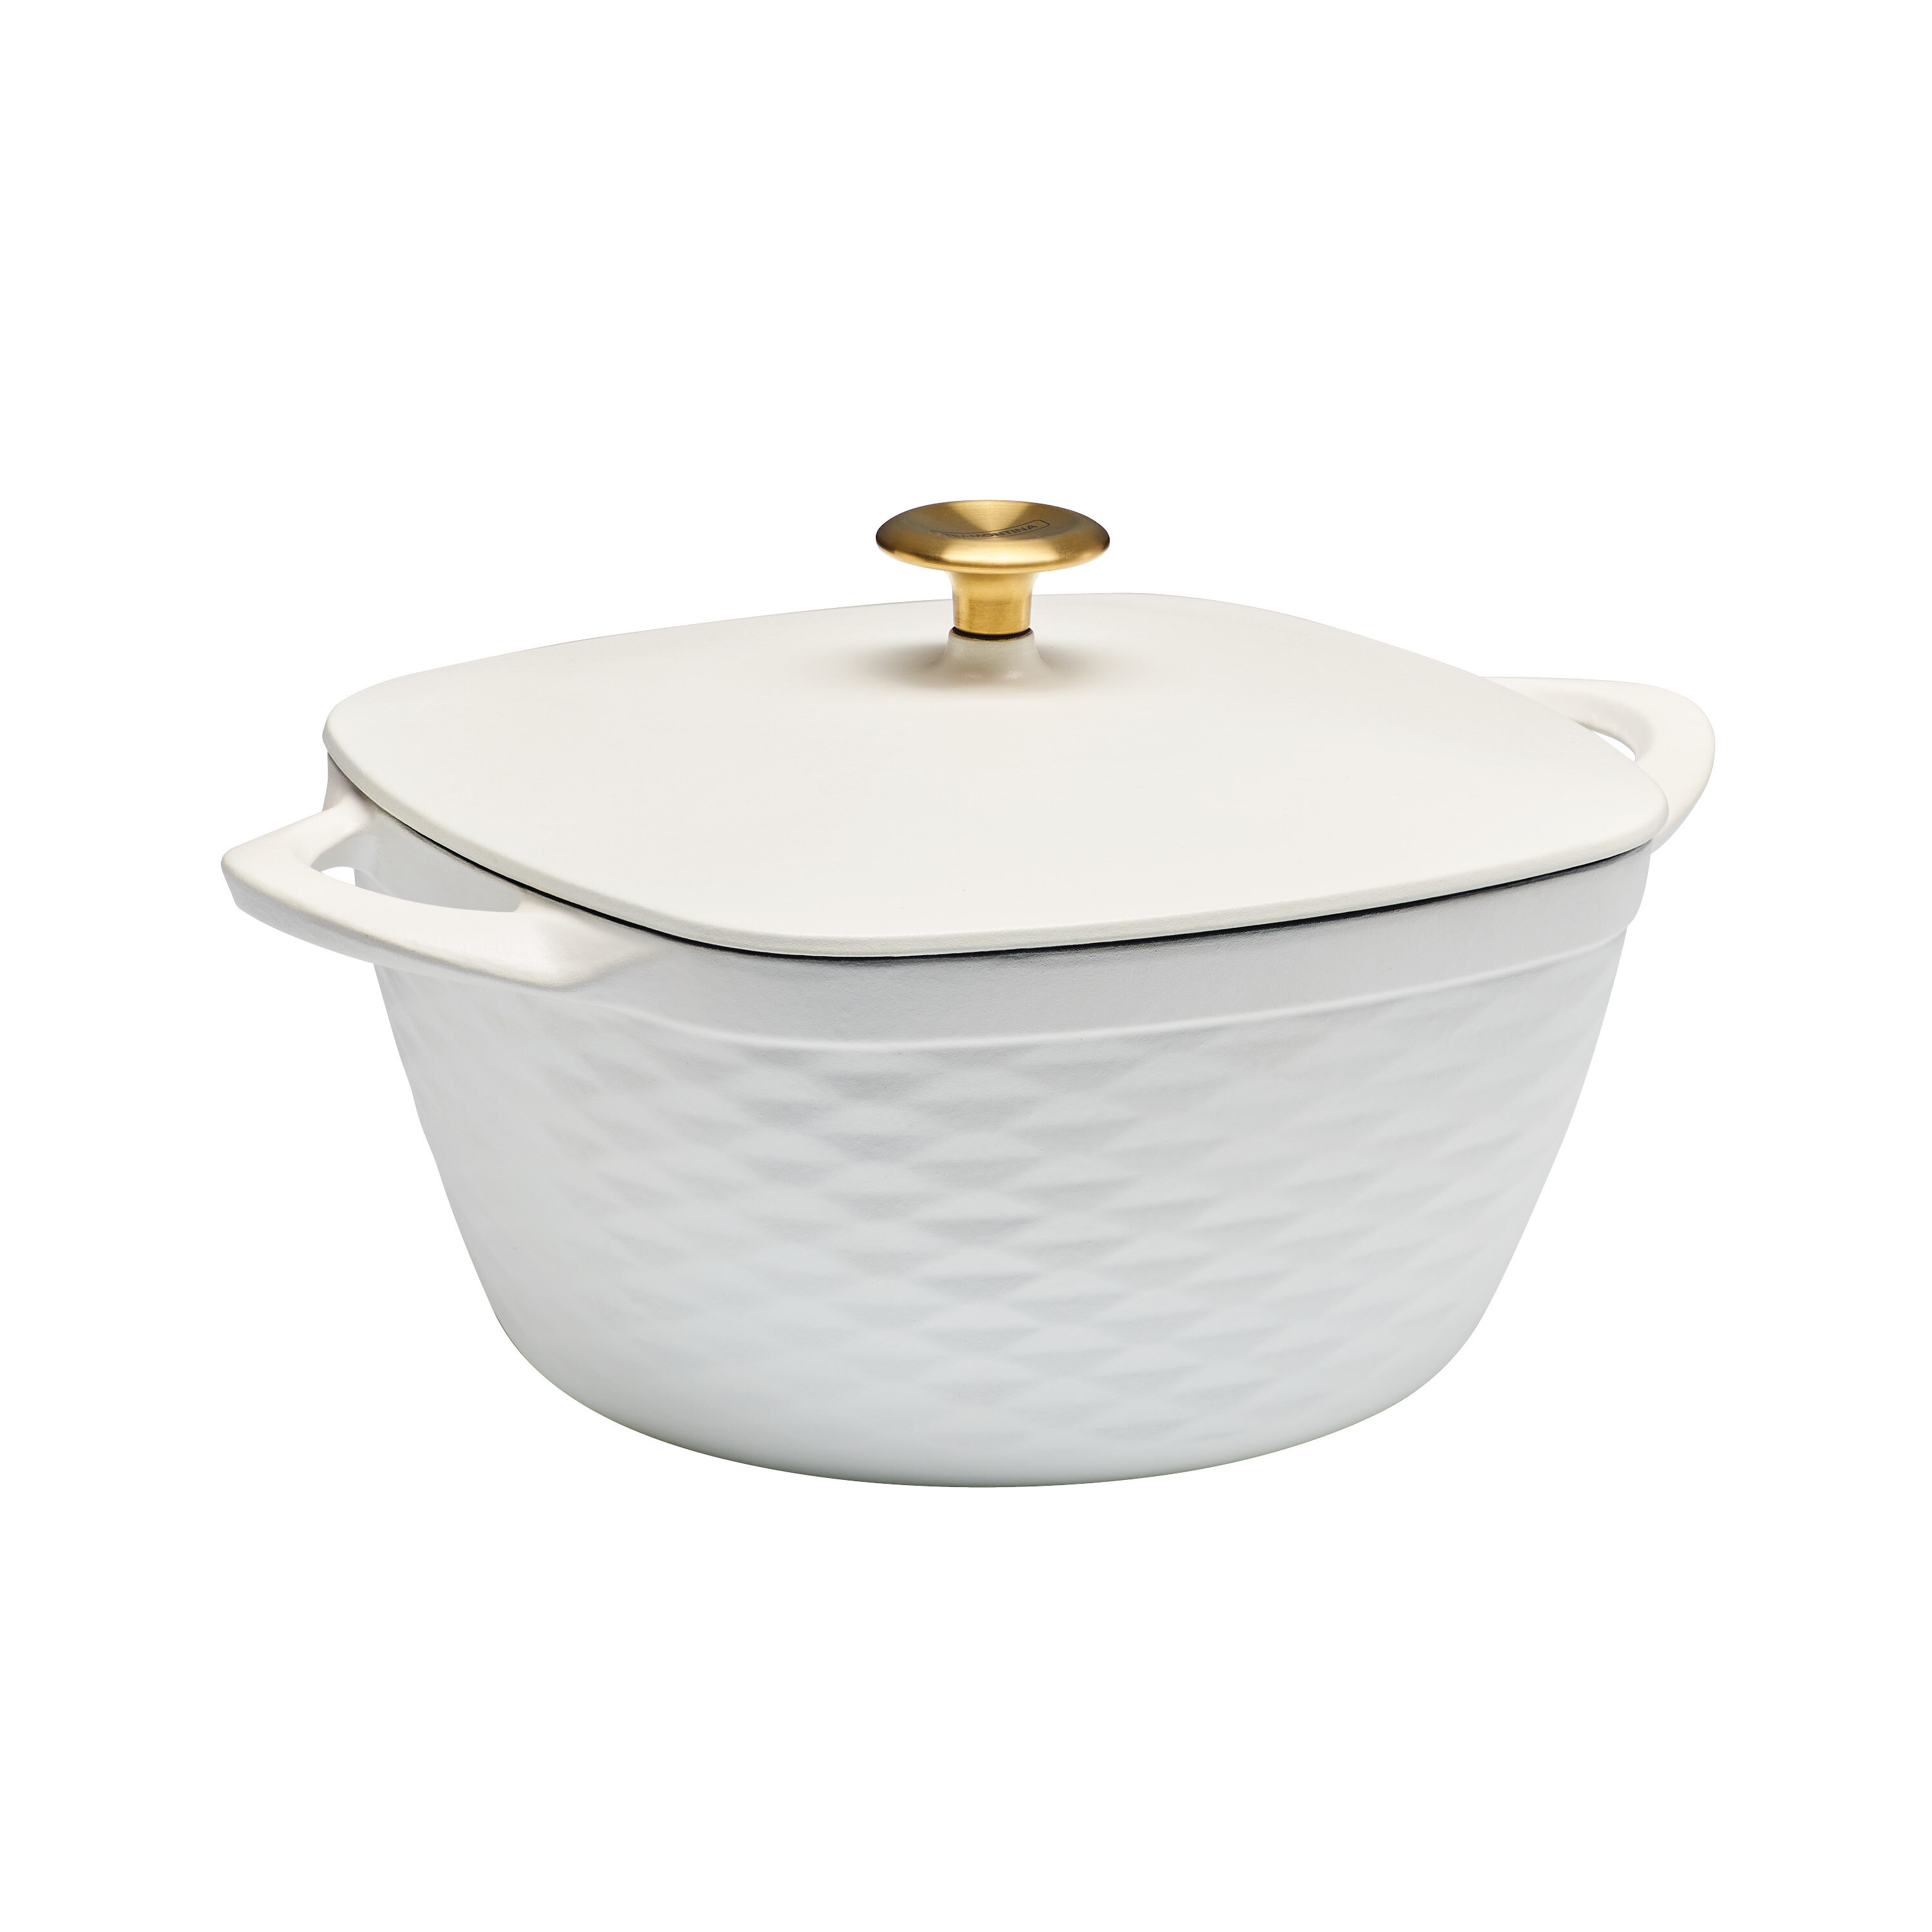 Enameled Cast Iron Dutch Oven with Lid - 6 Quart Enamel Coated Cookware Pot,  - China Casserole and Dutch Oven price